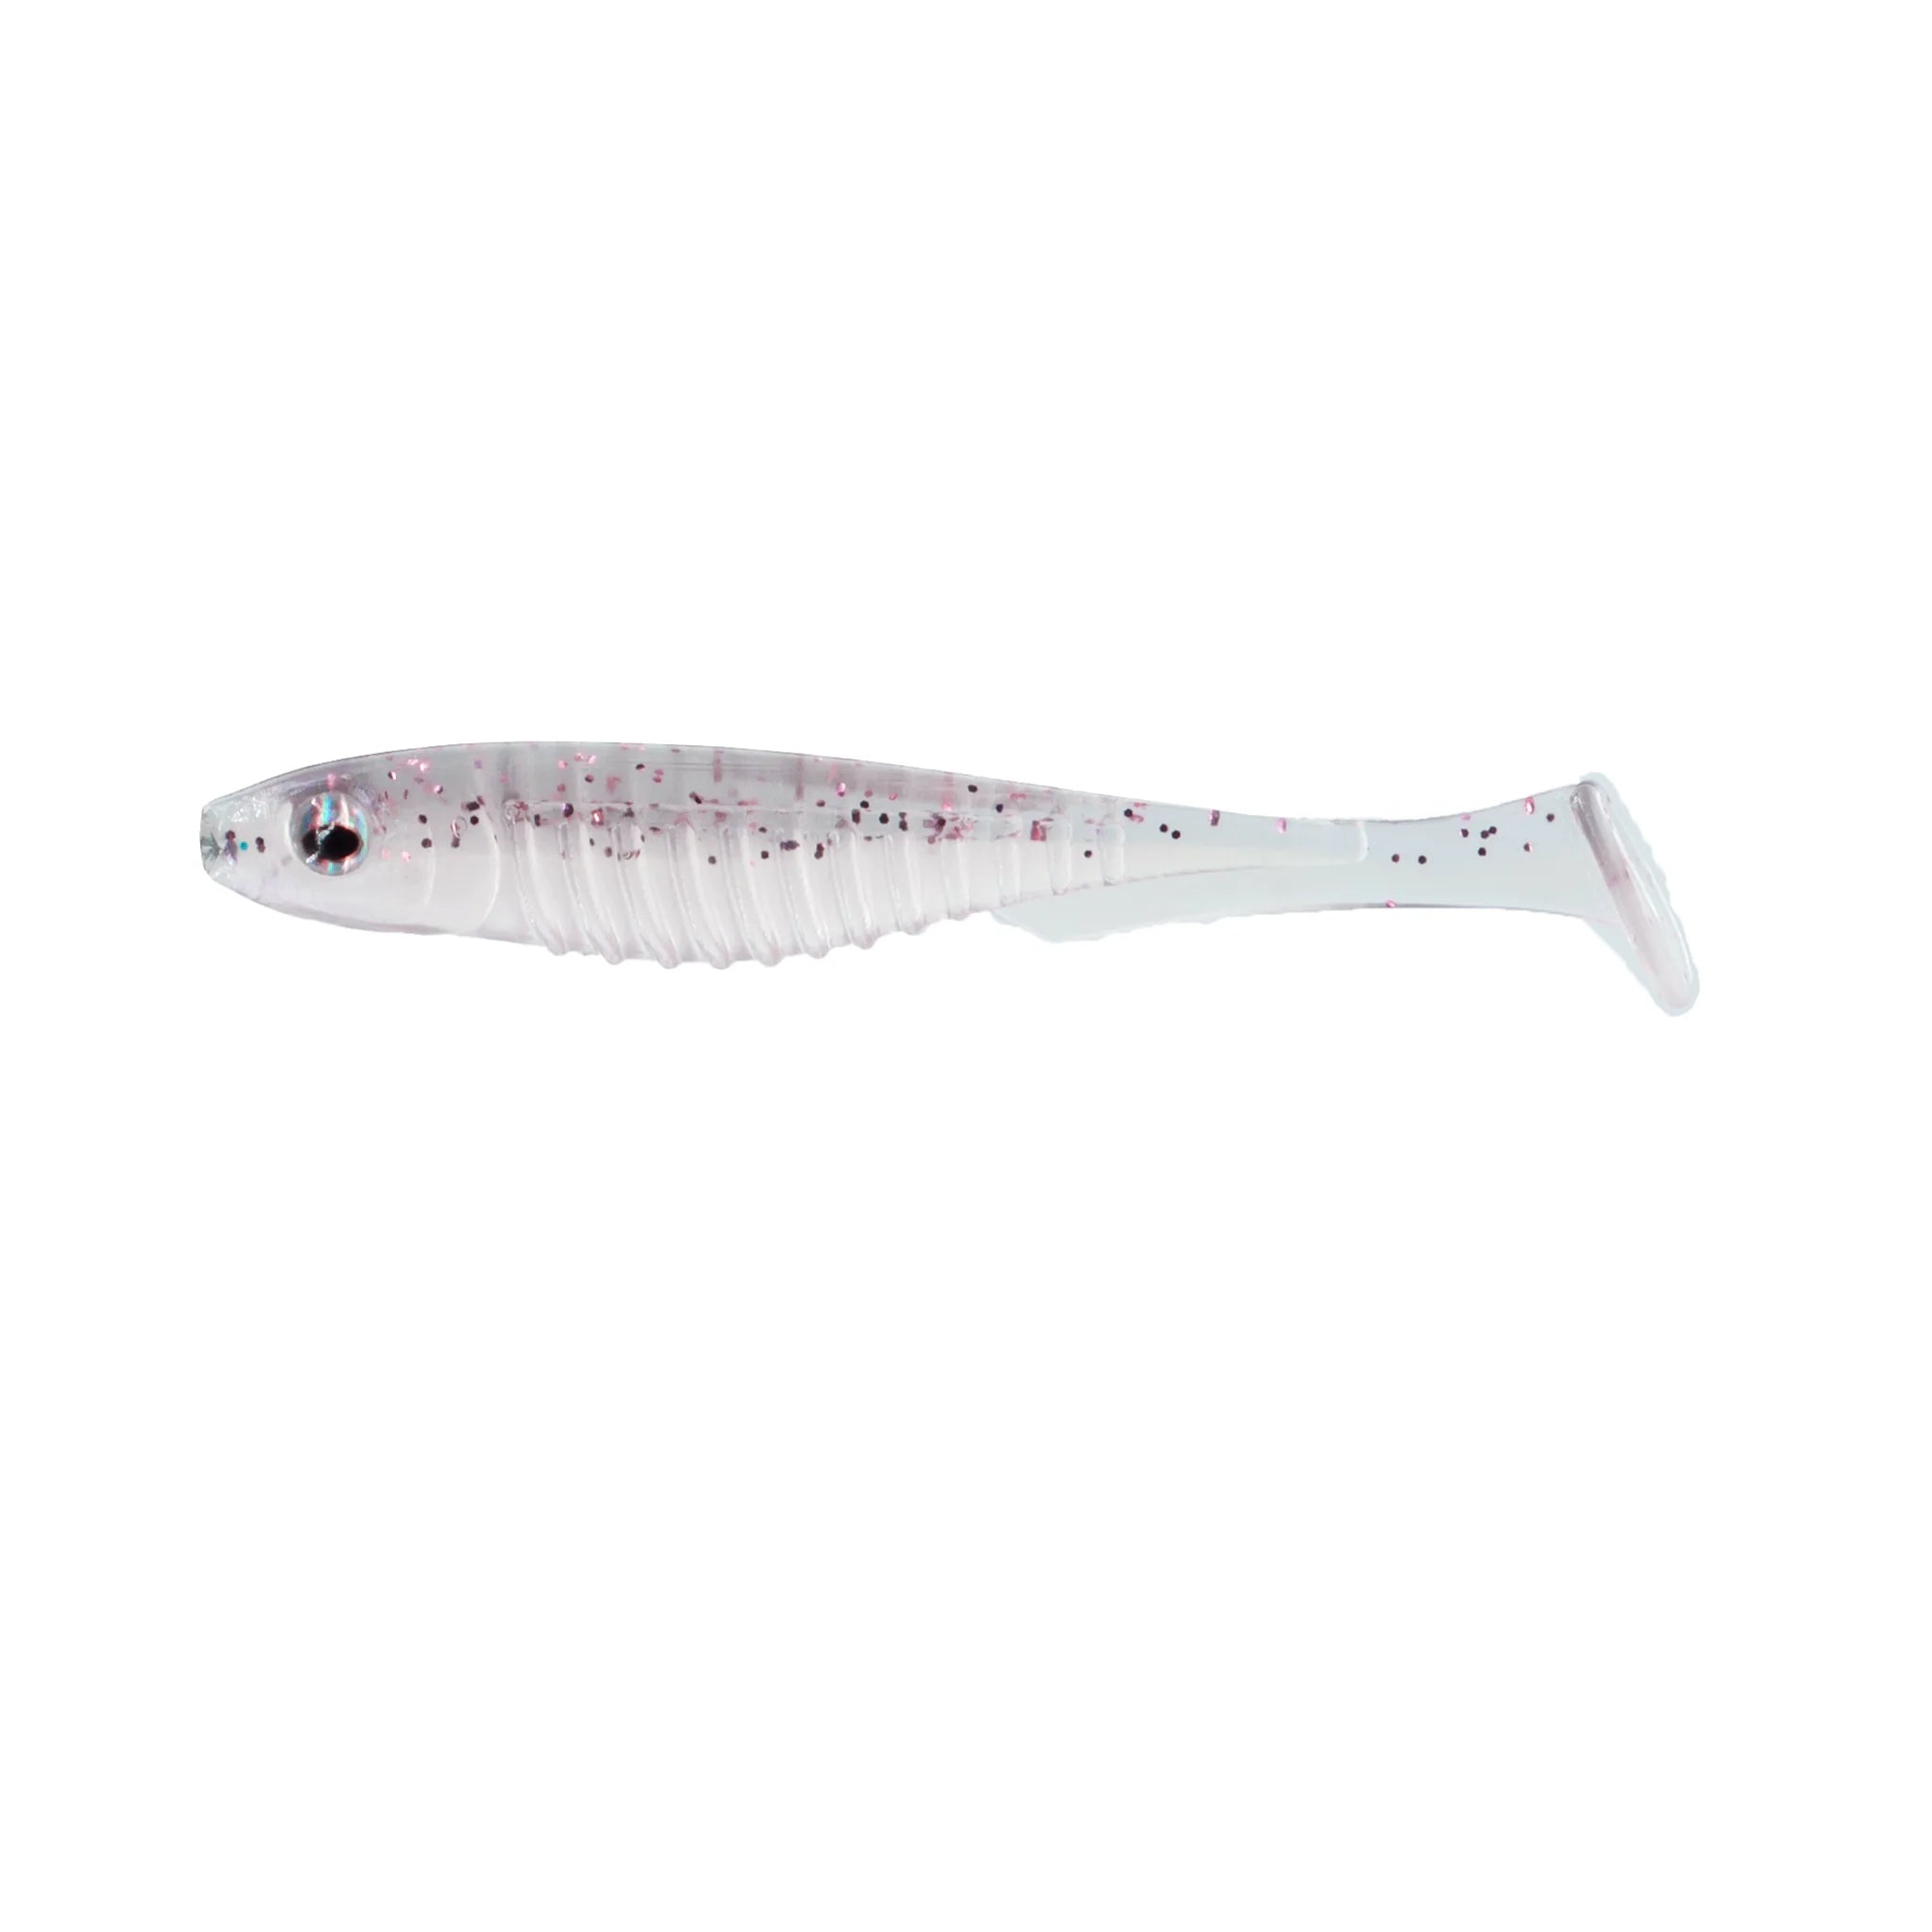 Buy clearwater-rose 6TH SENSE PARTY MINNOW